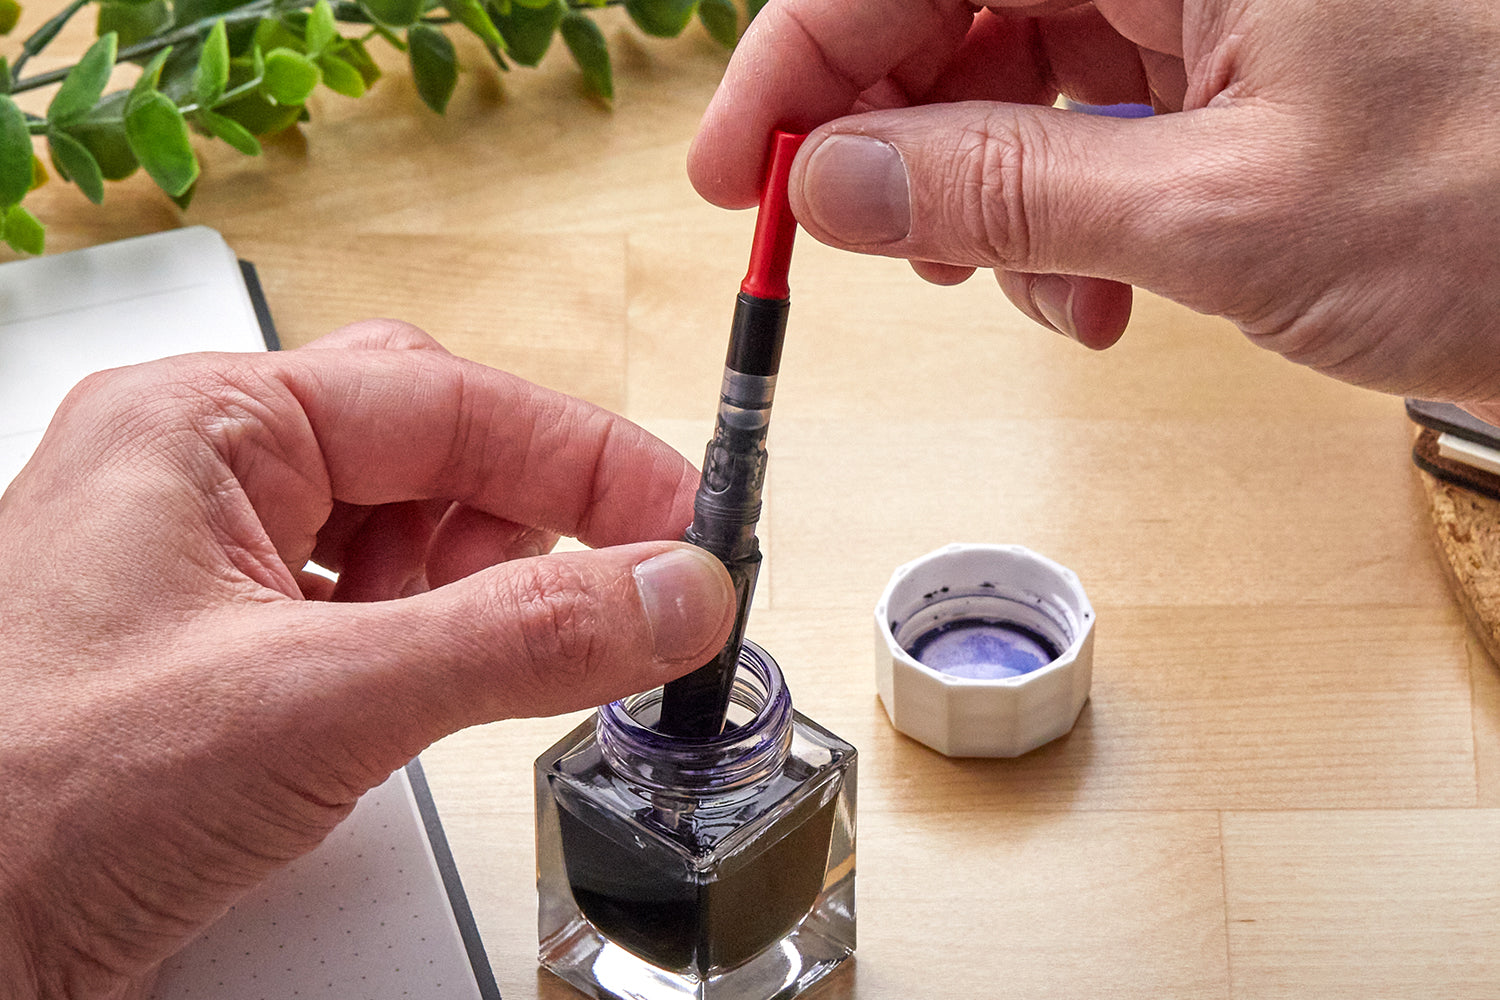 Hands filling a LAMY fountain pen with ink from a bottle